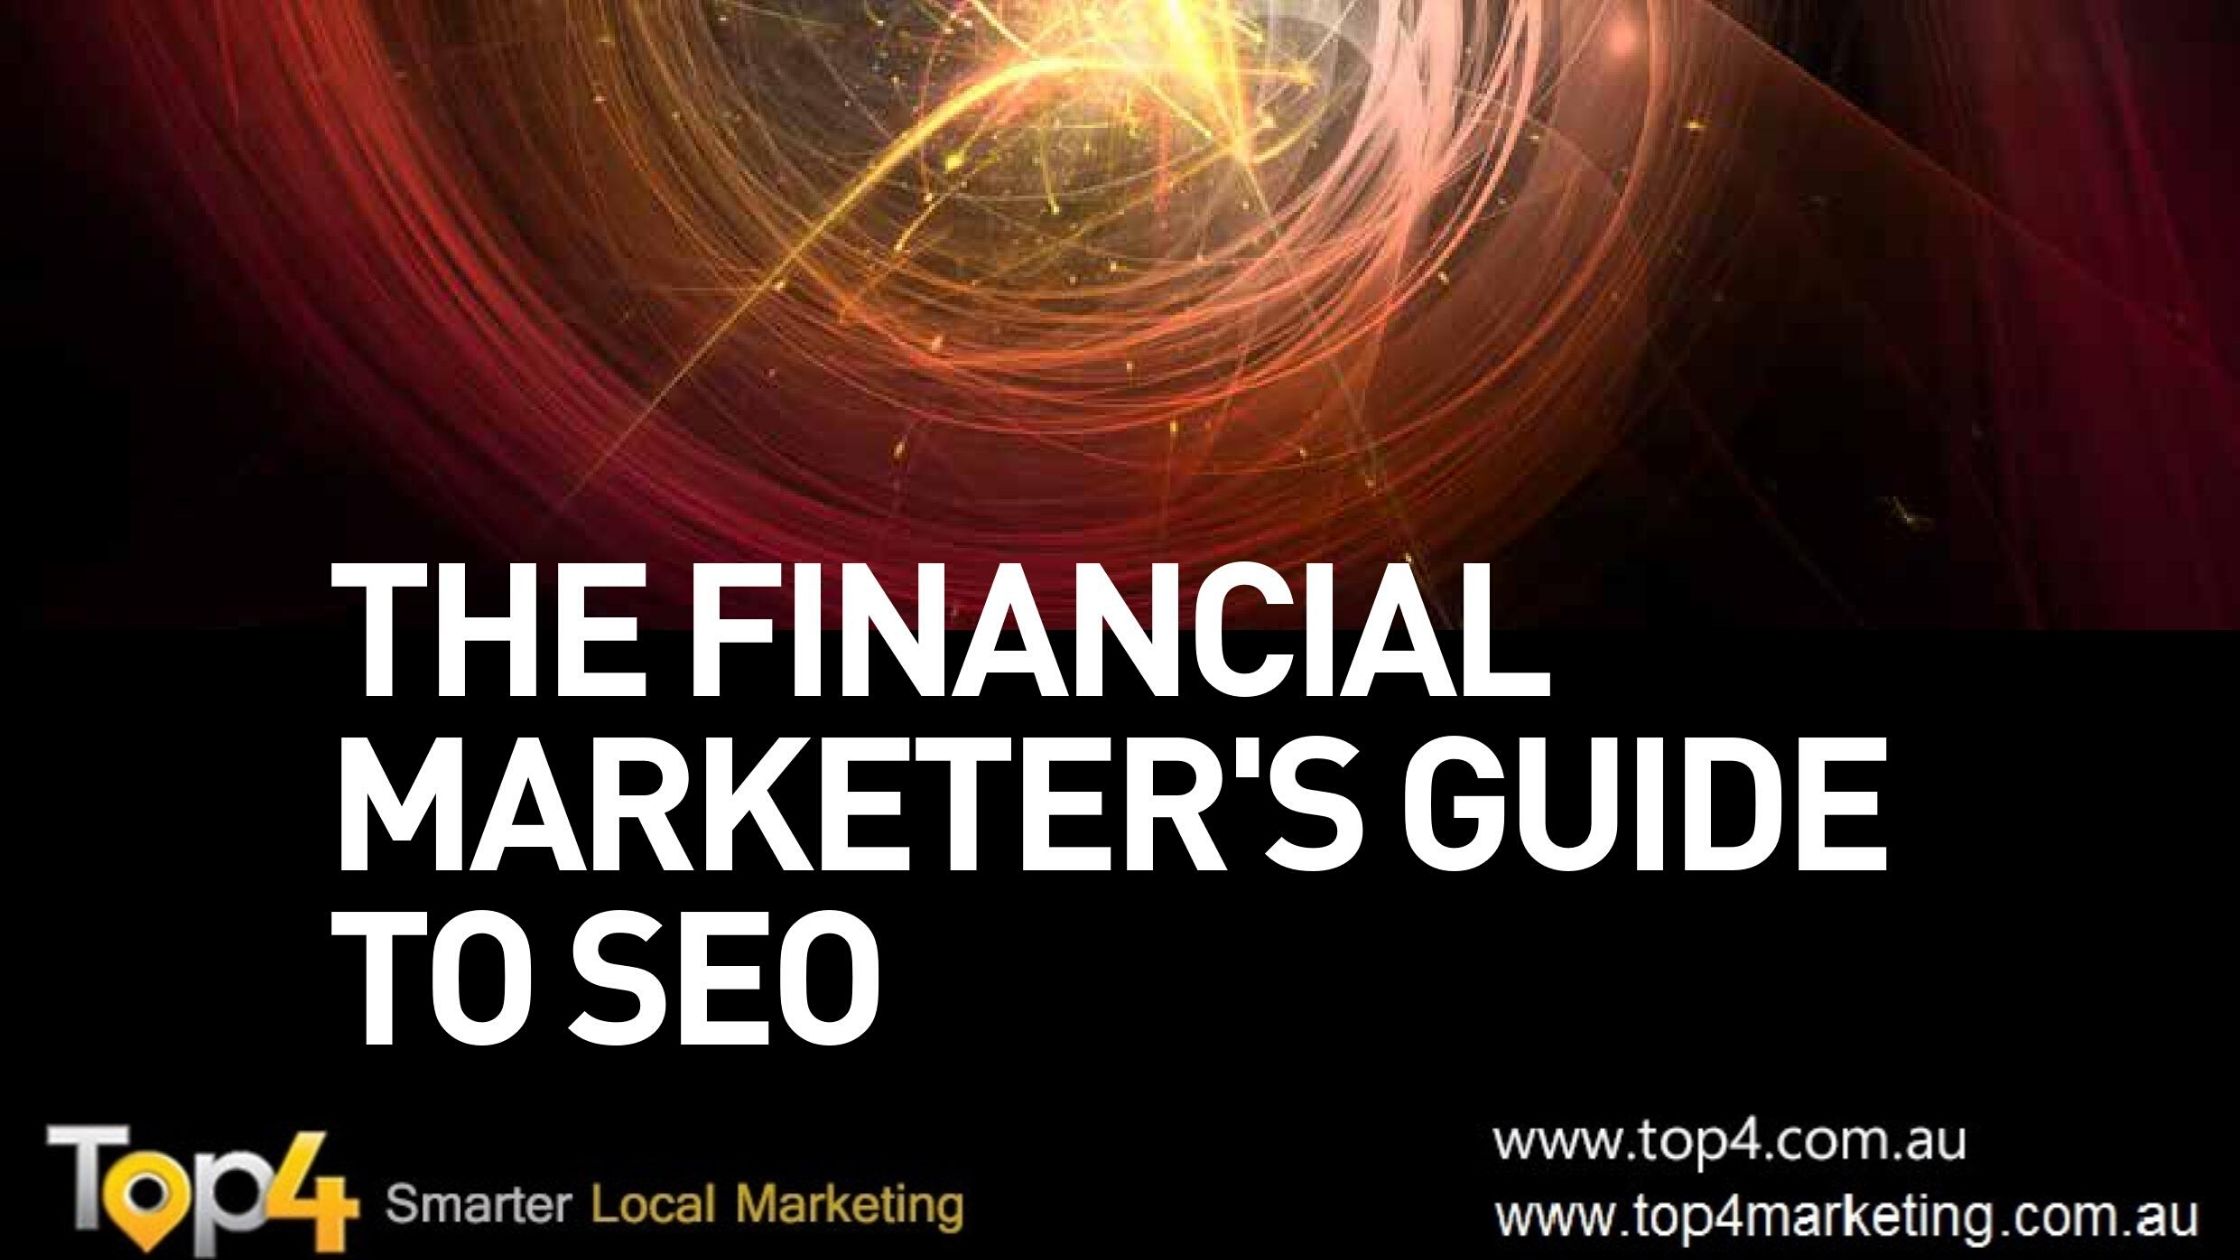 The Financial Marketer's Guide to SEO - Top4 Marketing